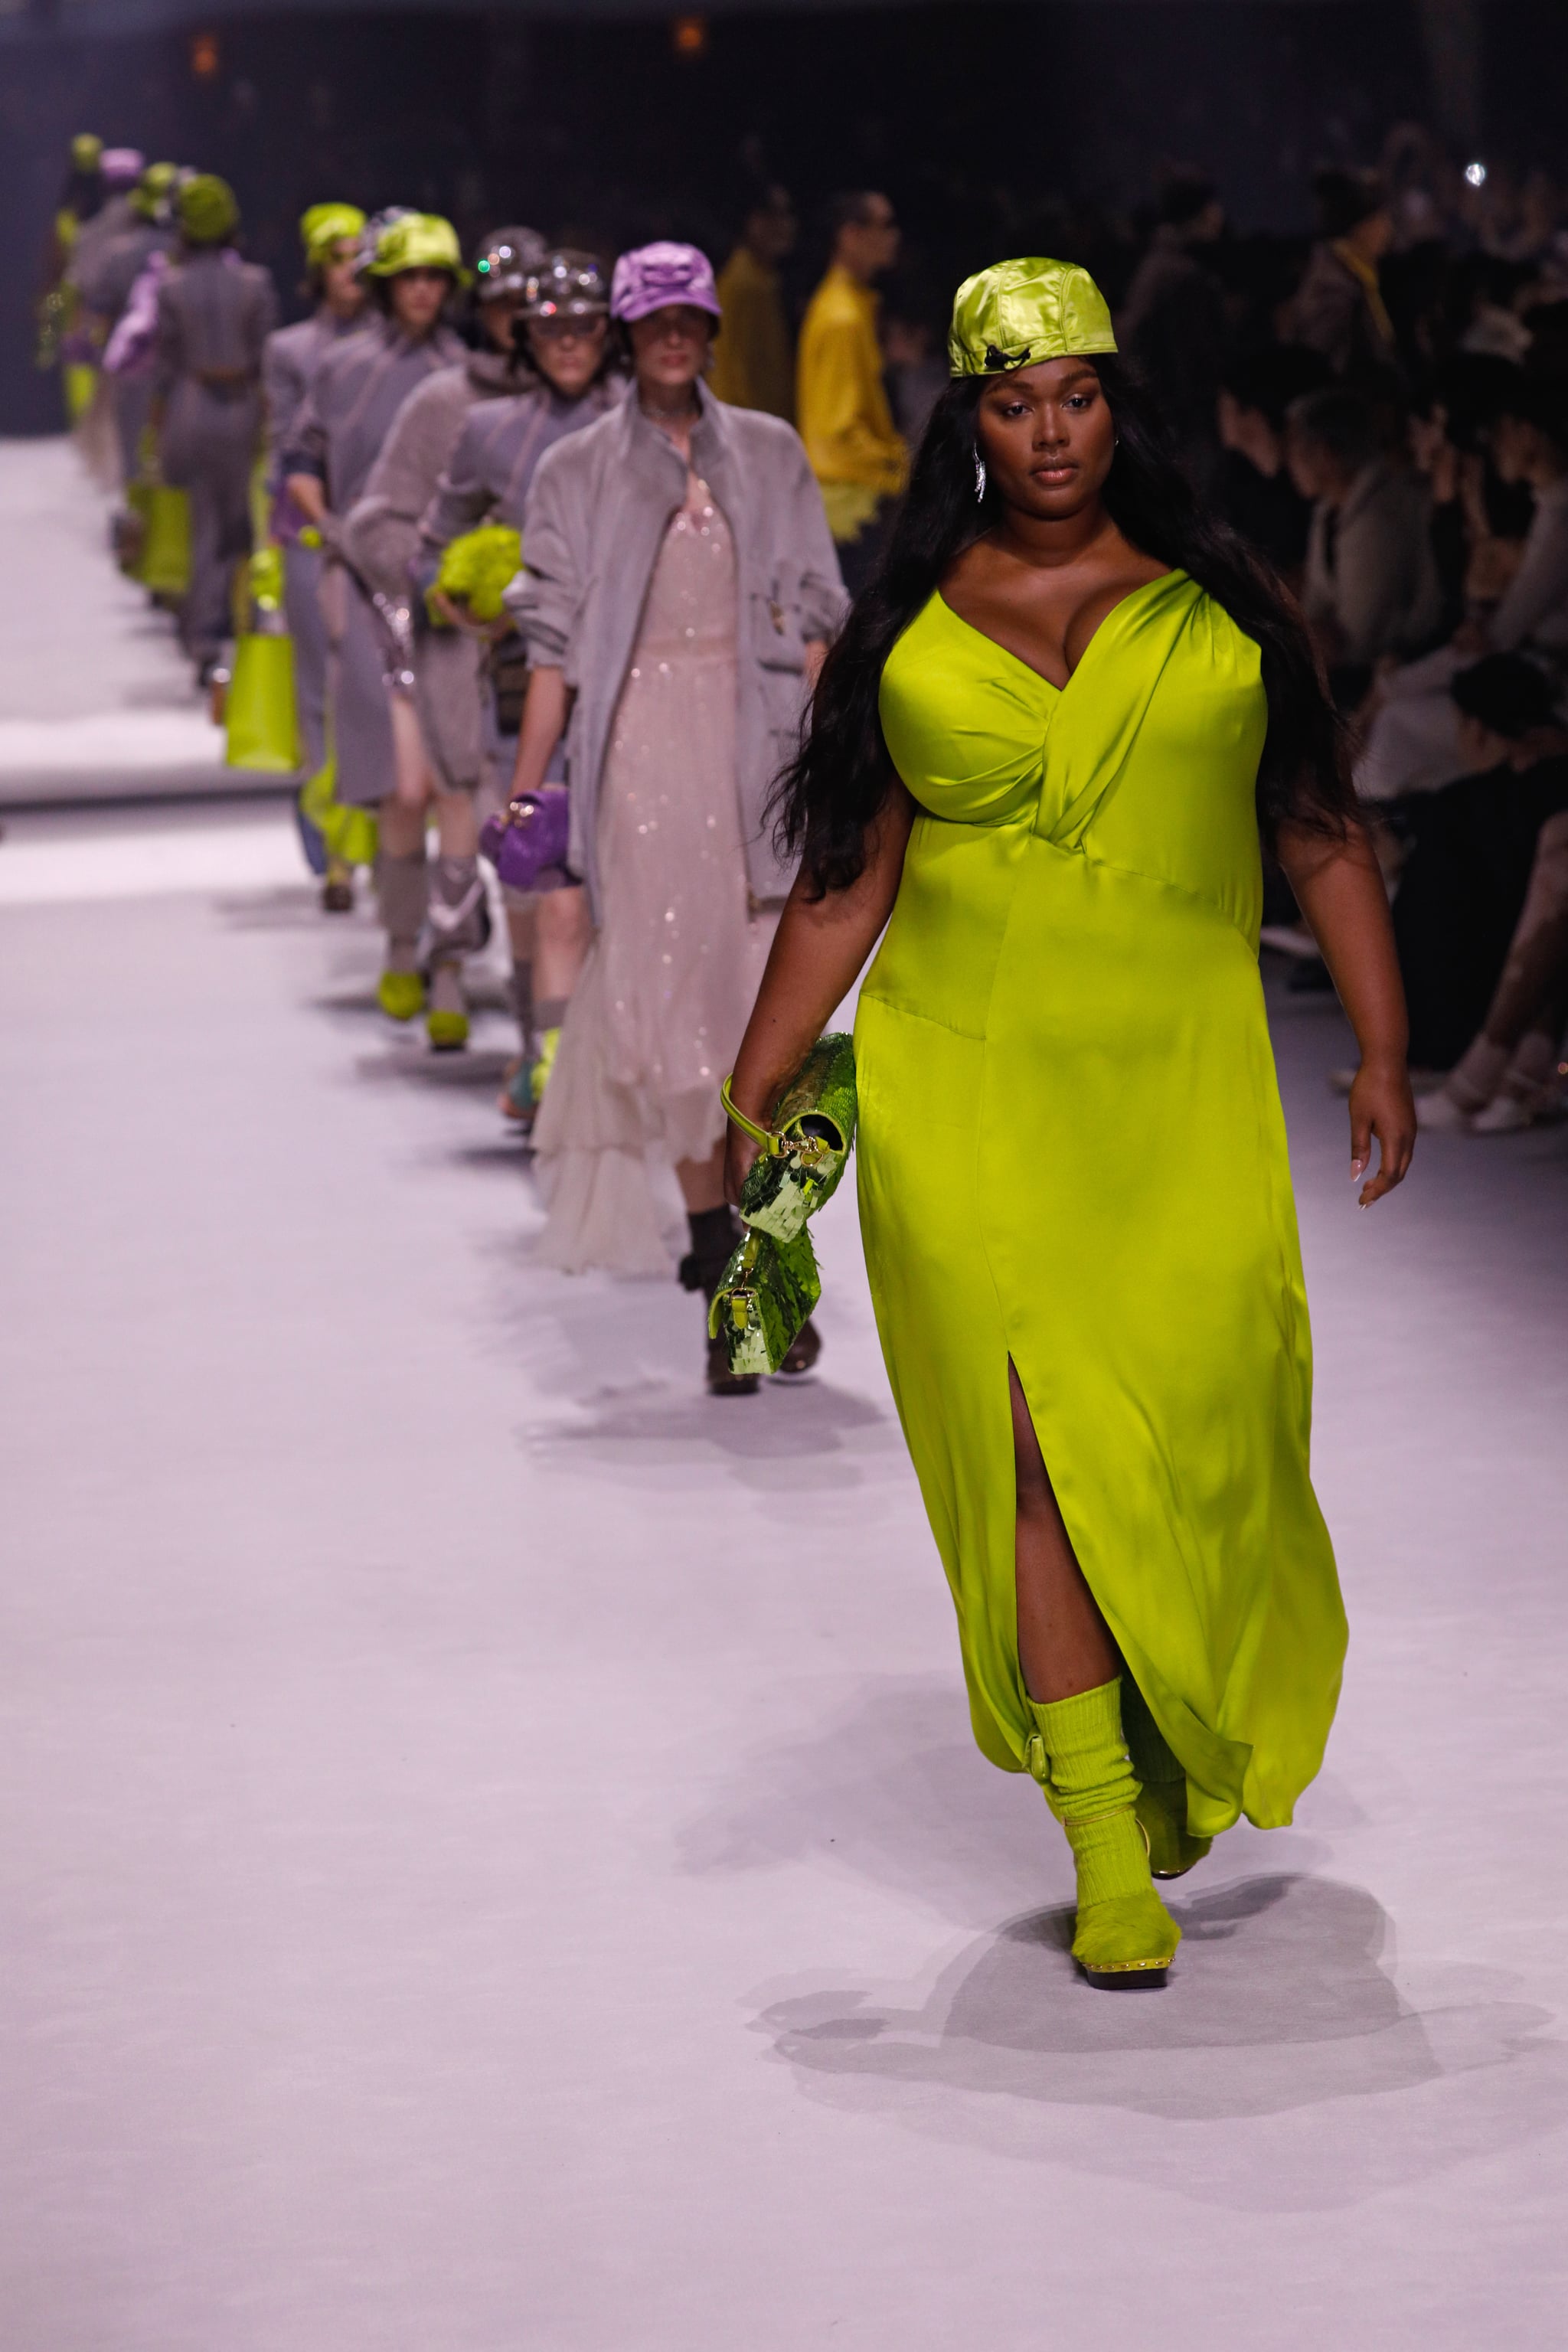 NEW YORK, NEW YORK - SEPTEMBER 09:  Models walk the finale on the runway at the Fendi Spring Summer 2023 during September 2022 New York Fashion Week: The Shows at Hammerstein Ballroom on September 09, 2022 in New York City. (Photo by Randy Brooke/WireImage)